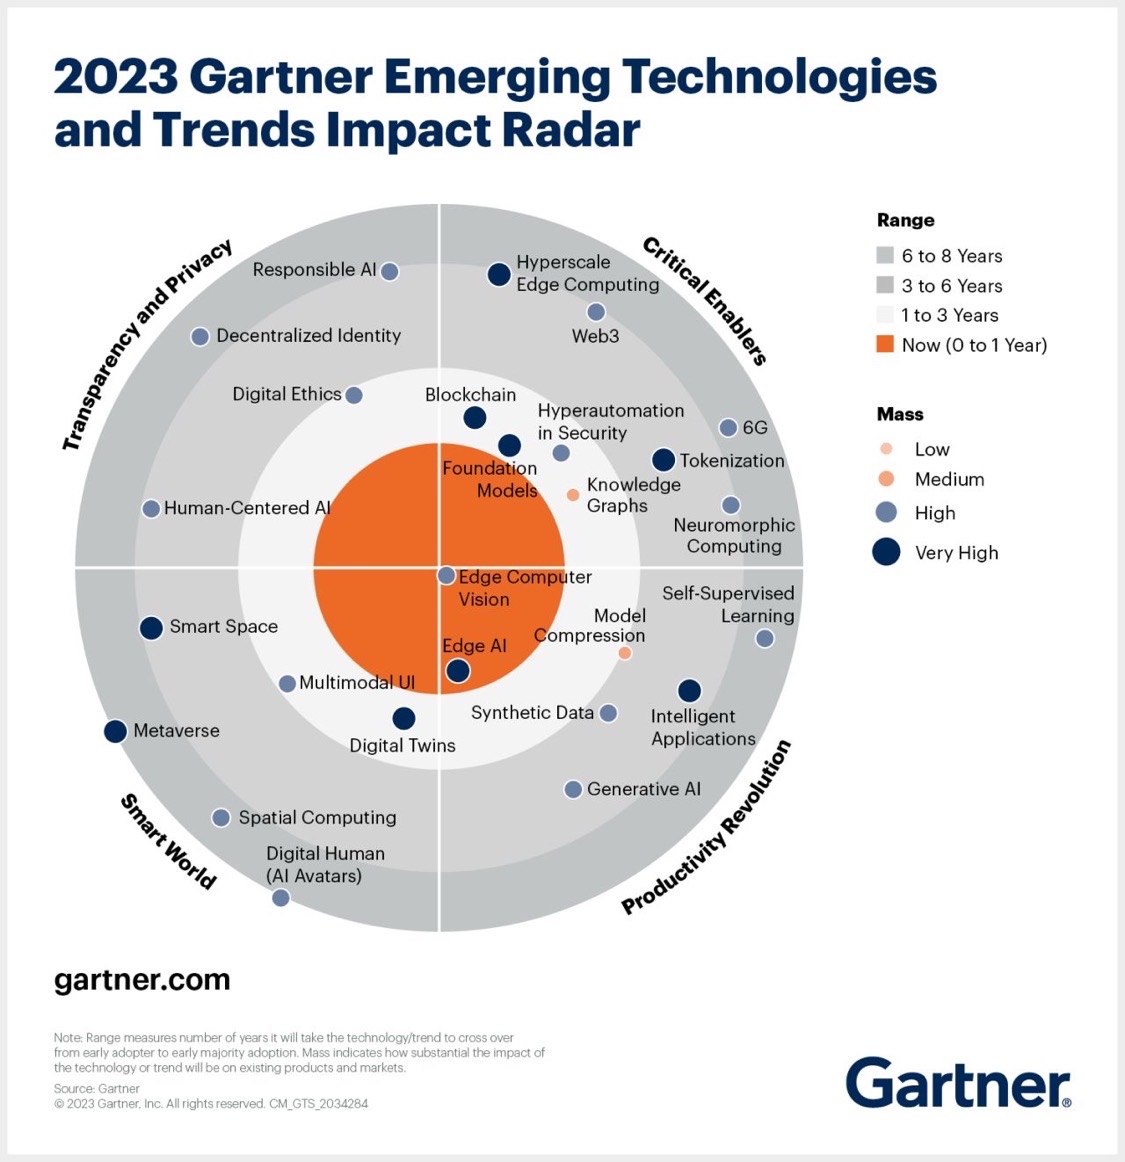 Just In: The 2023 Gartner Emerging Technologies and Trends Impact Radar 🎯

According to our experts, these 4️⃣ key themes will prove critical for product leaders to evaluate as part of their competitive strategy:

#GartnerHT #EmergingTechnology #TechnologyTrends